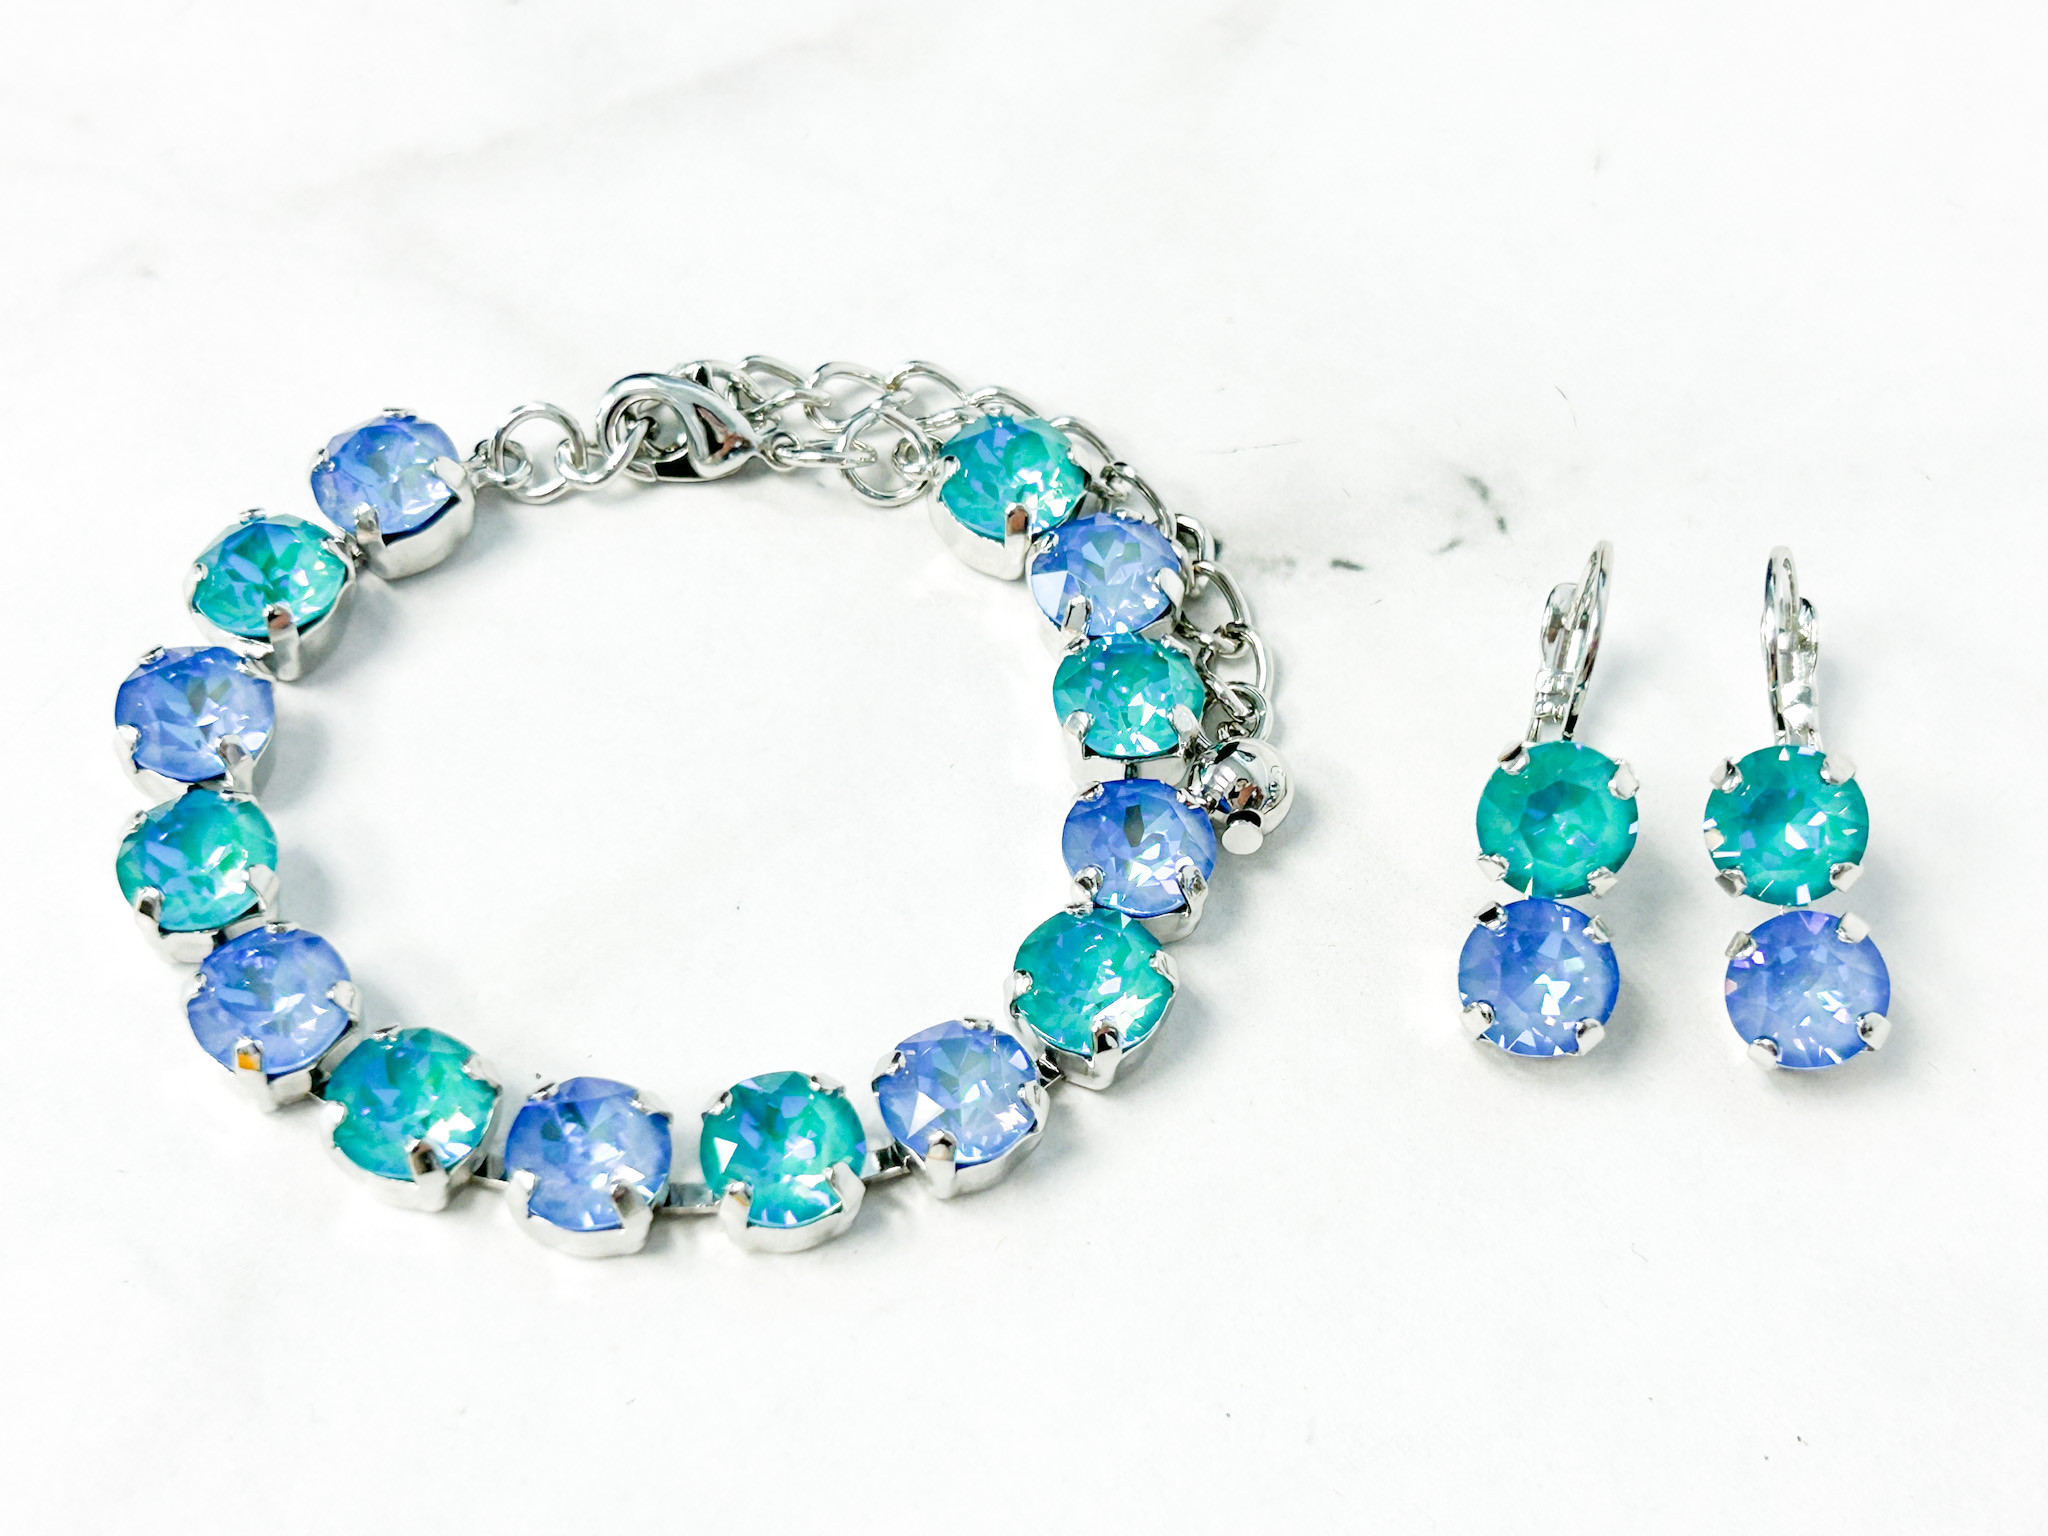 Caribbean Waters Jewelry Set made with Swarovski Crystals